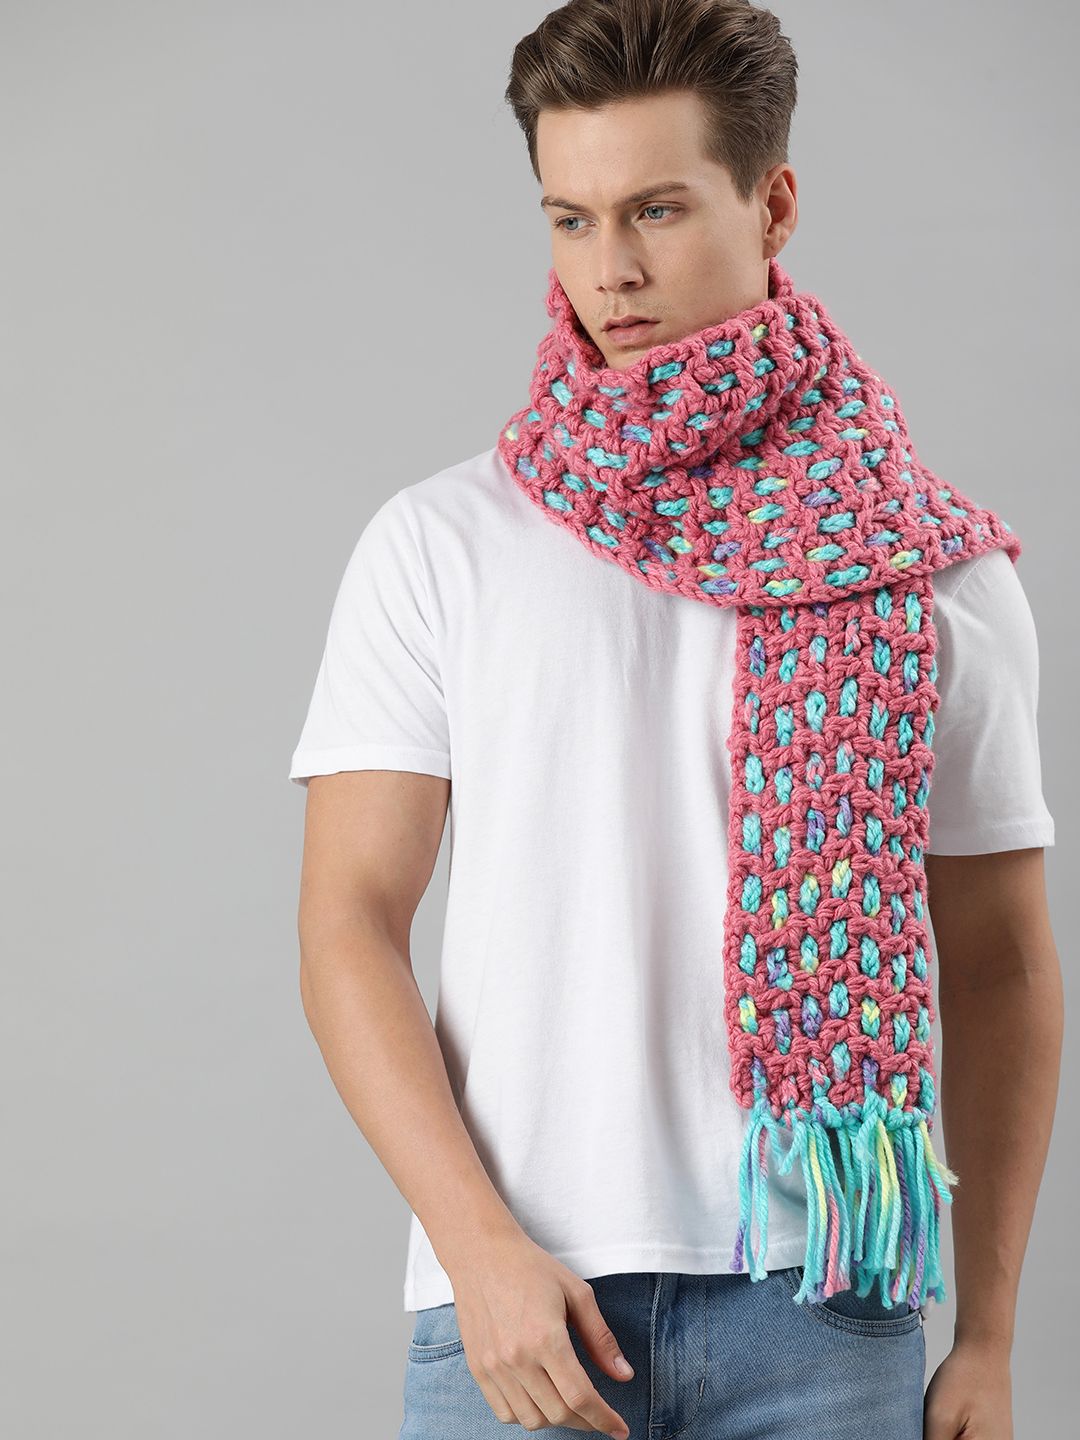 Magic Needles Unisex Pink & Blue Self Design Knitted Scarf with Tassels Price in India